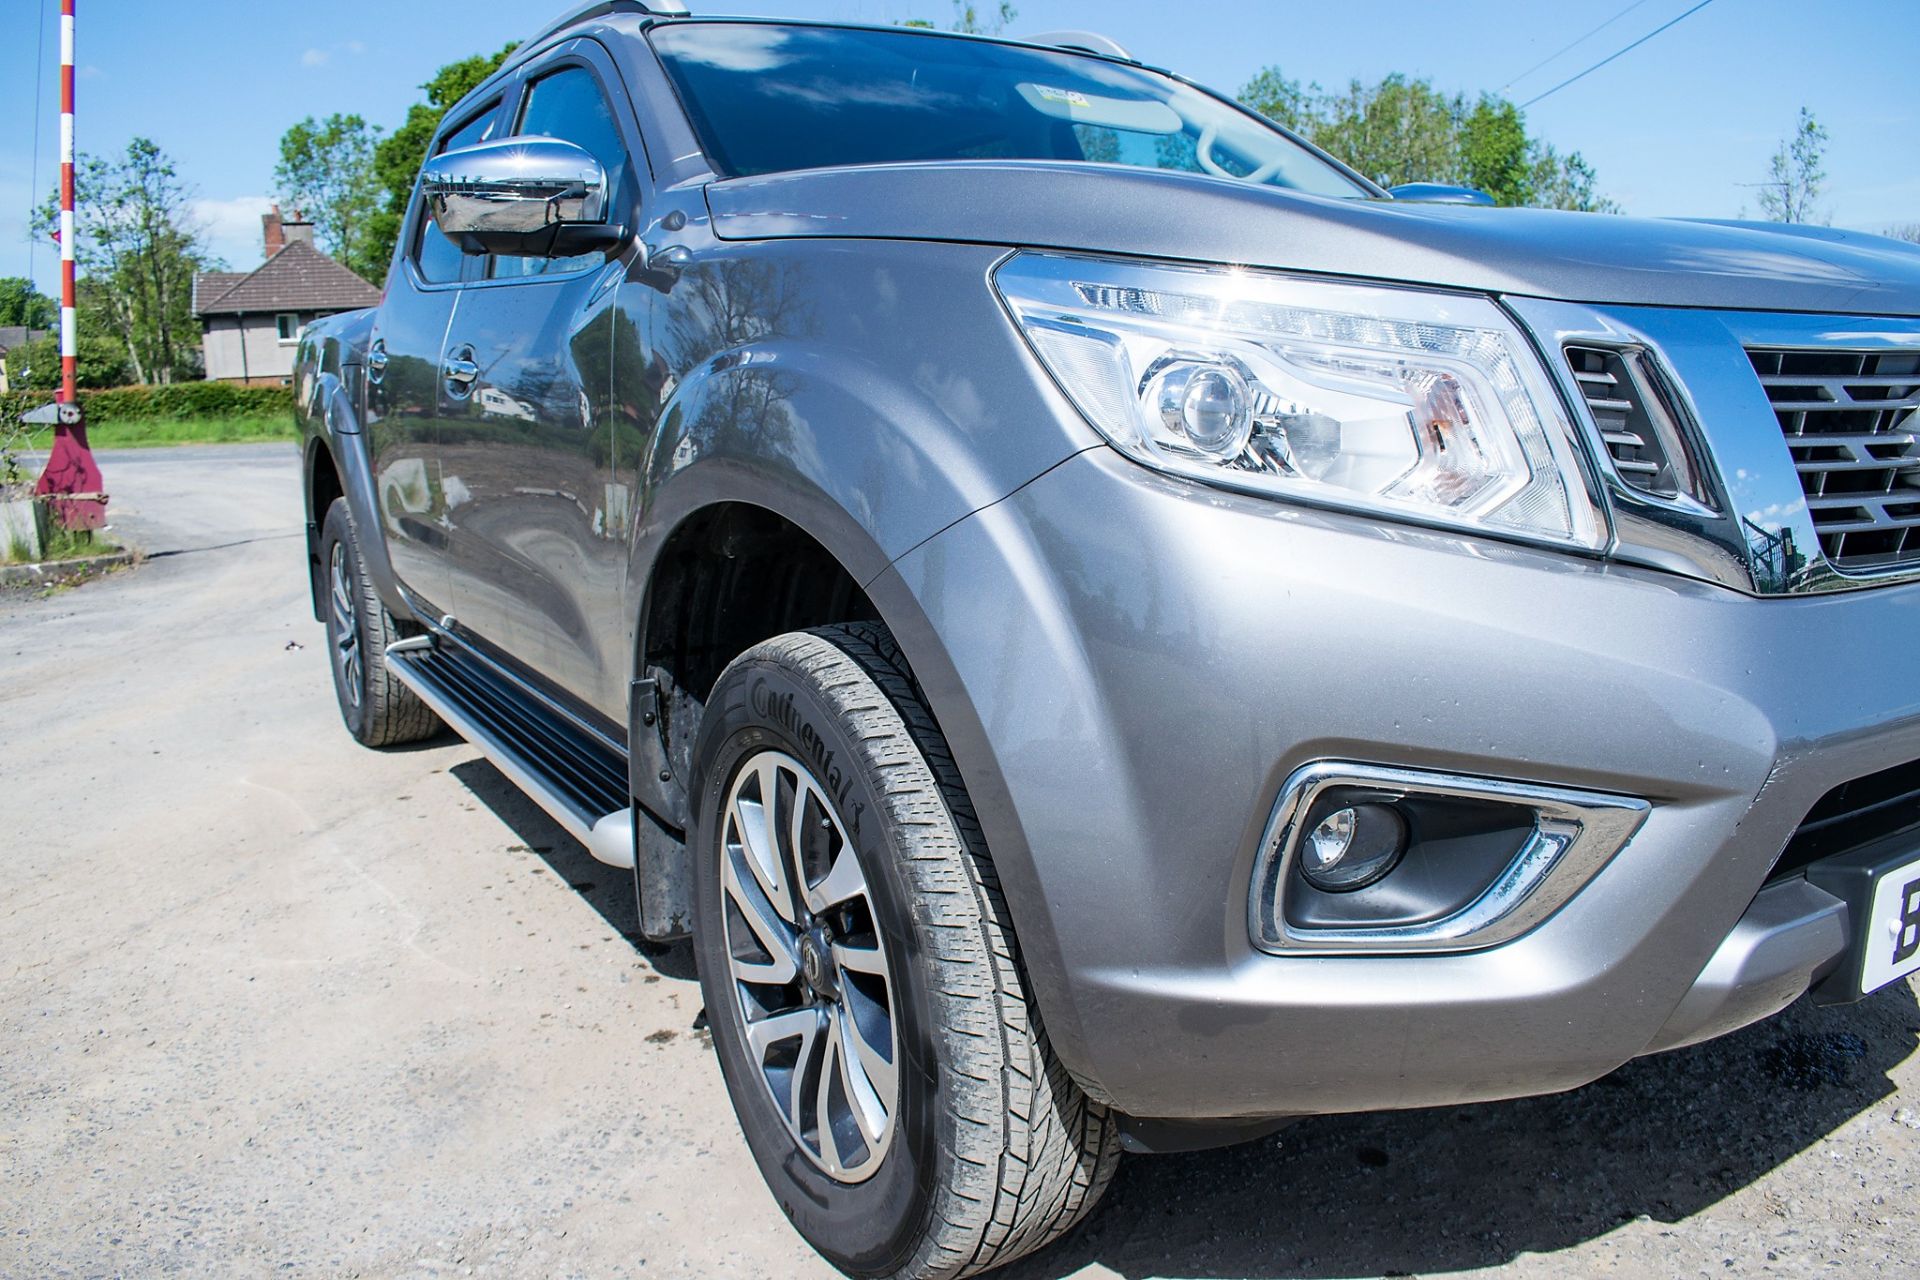 Nissan Navara Tekna DCi Auto double cab pick up truck Registration Number: BL68 LKM Date of - Image 9 of 25